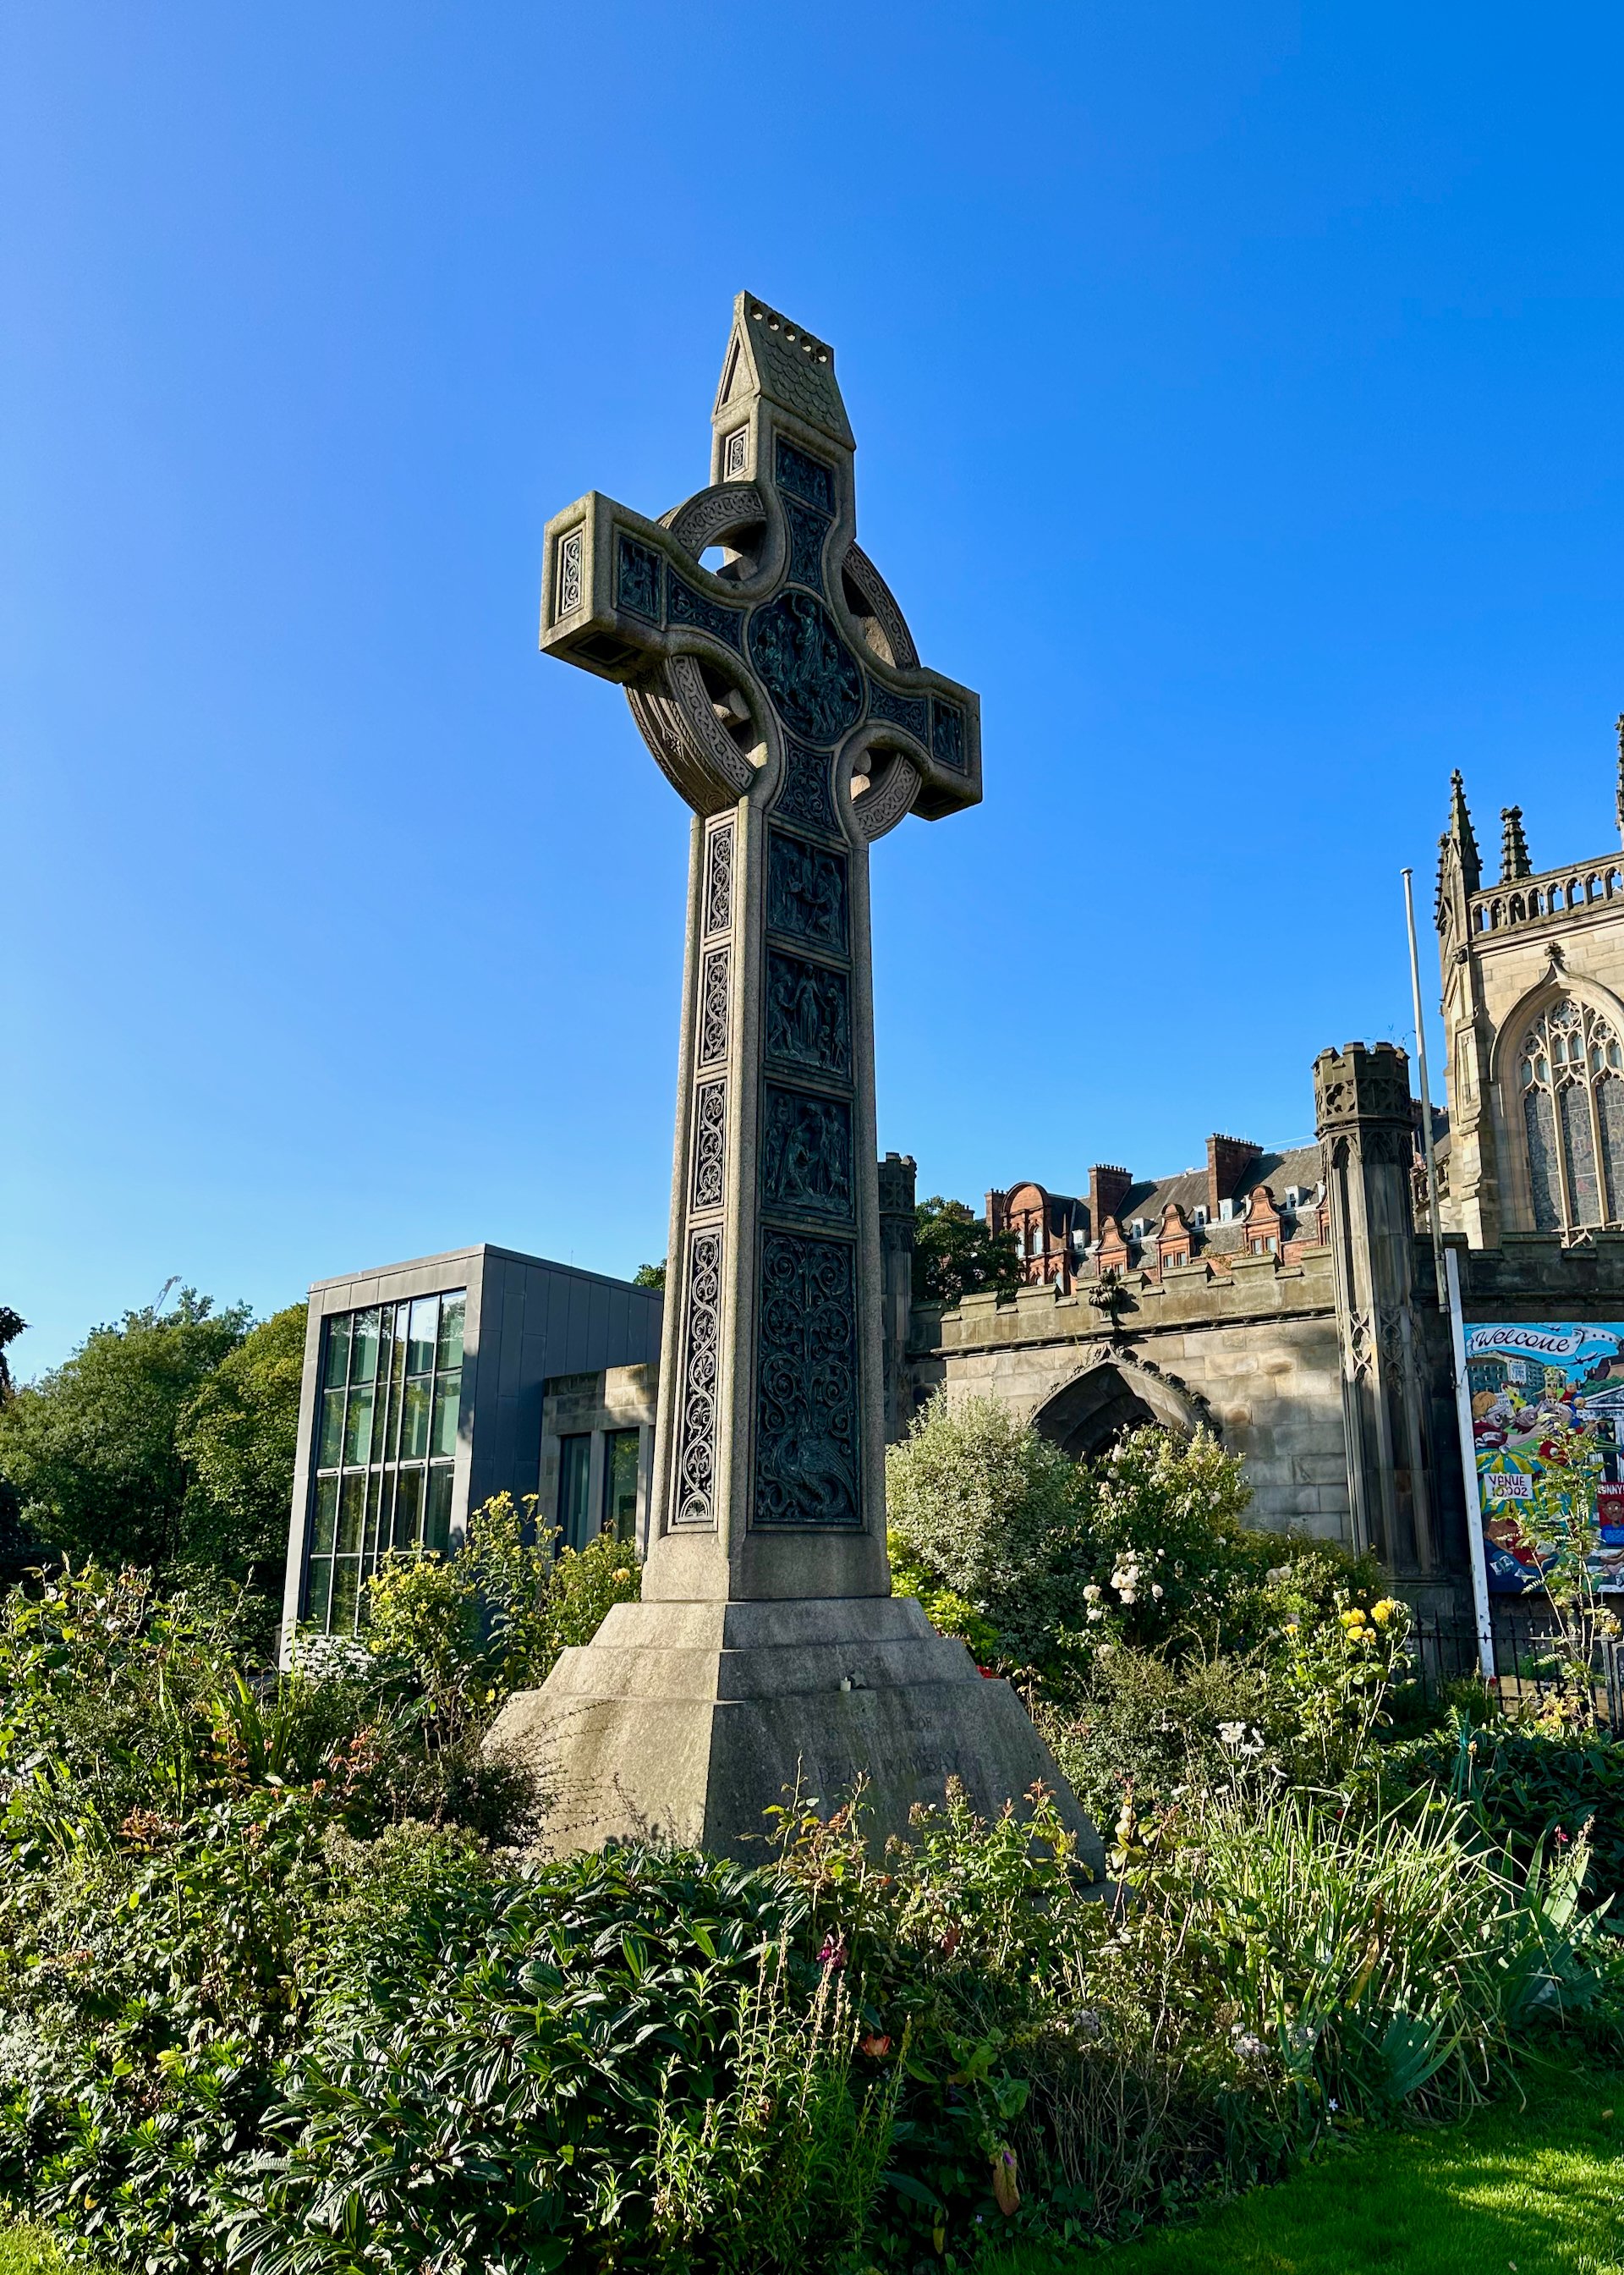  This amazing cross is outside a church on the main street, overlooking the castle gardens. It’s quire the work of art in its own right.  